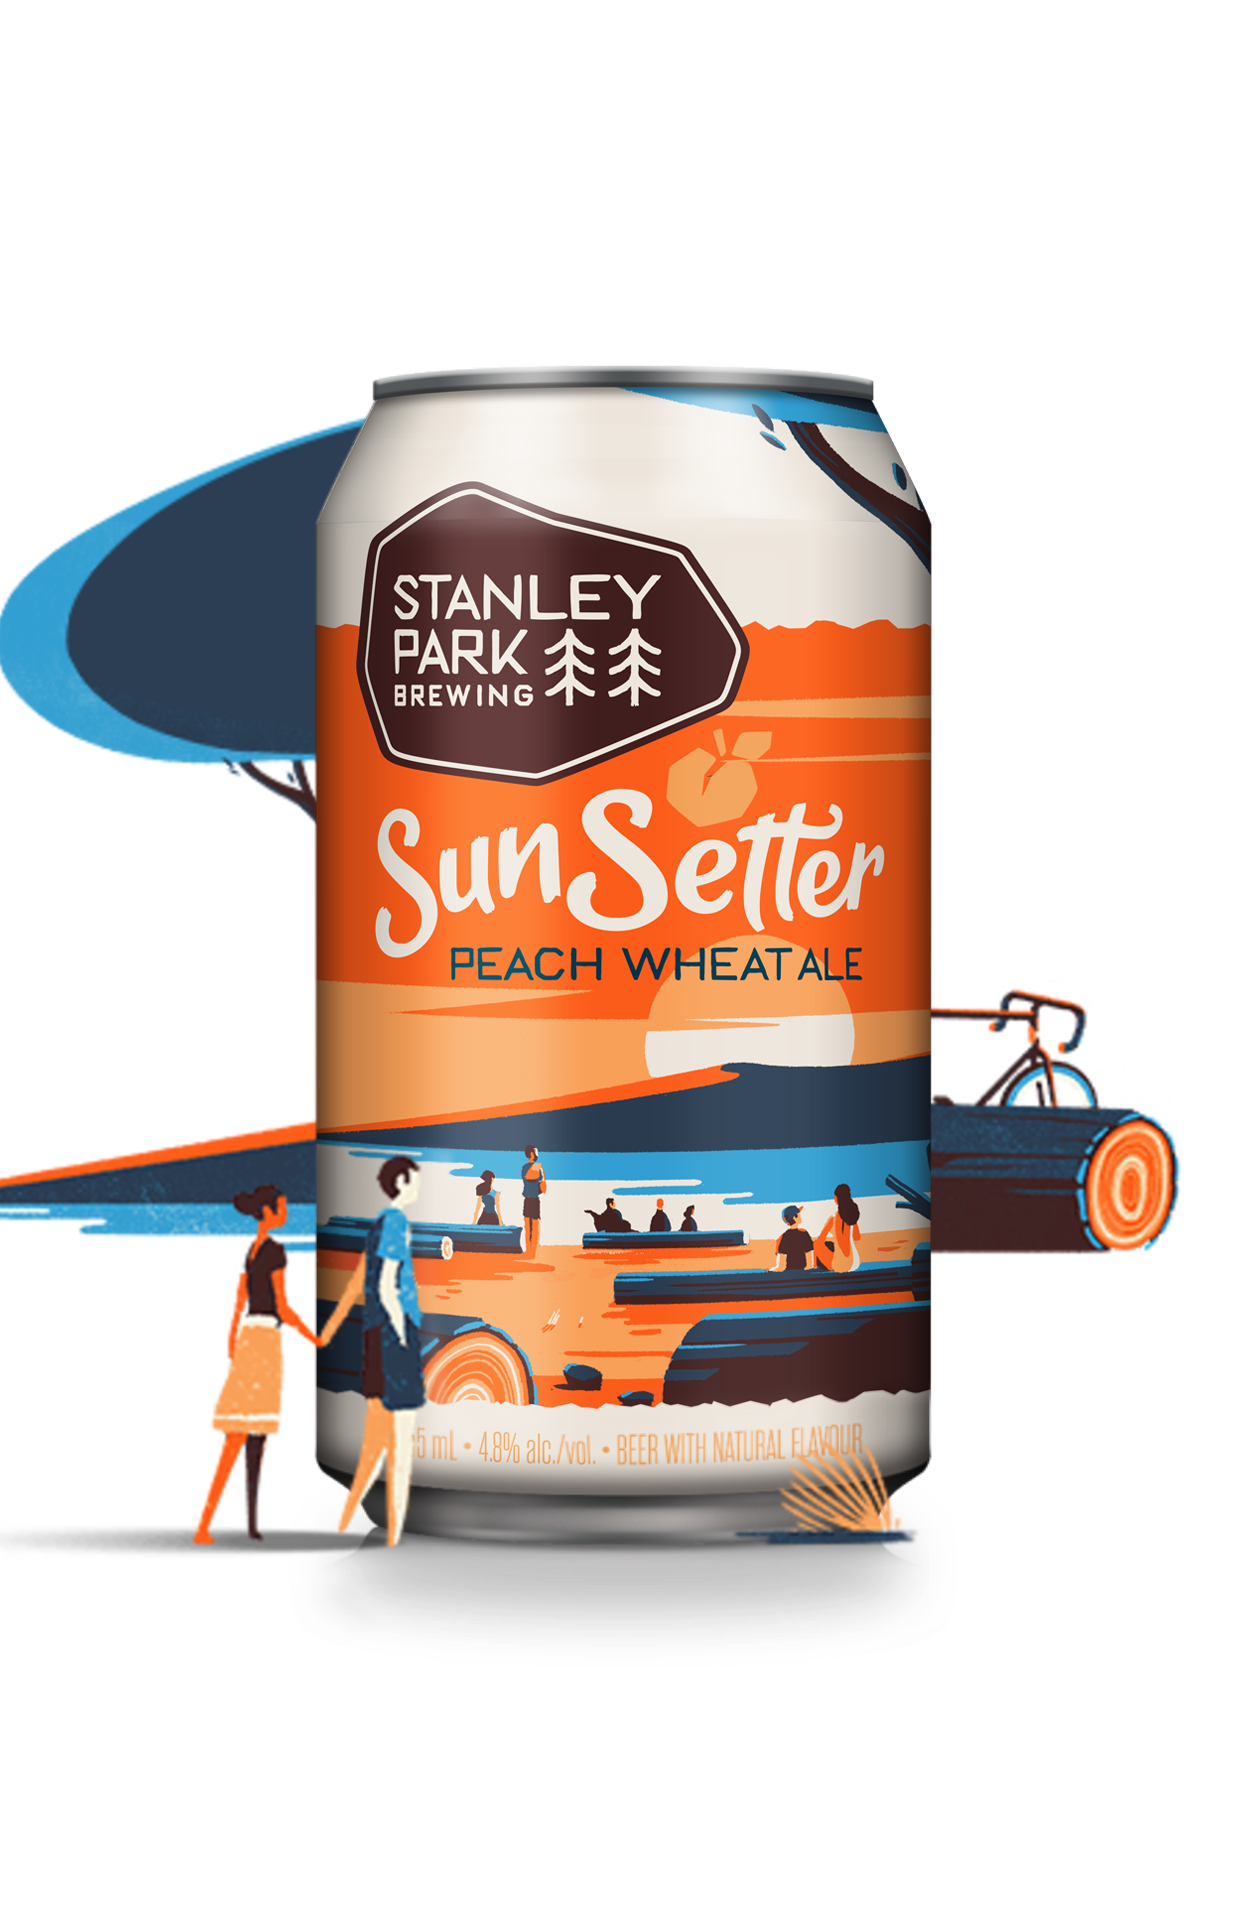 SunSetter Non Alcoholic Peach Wheat Ale - Stanley Park Brewing